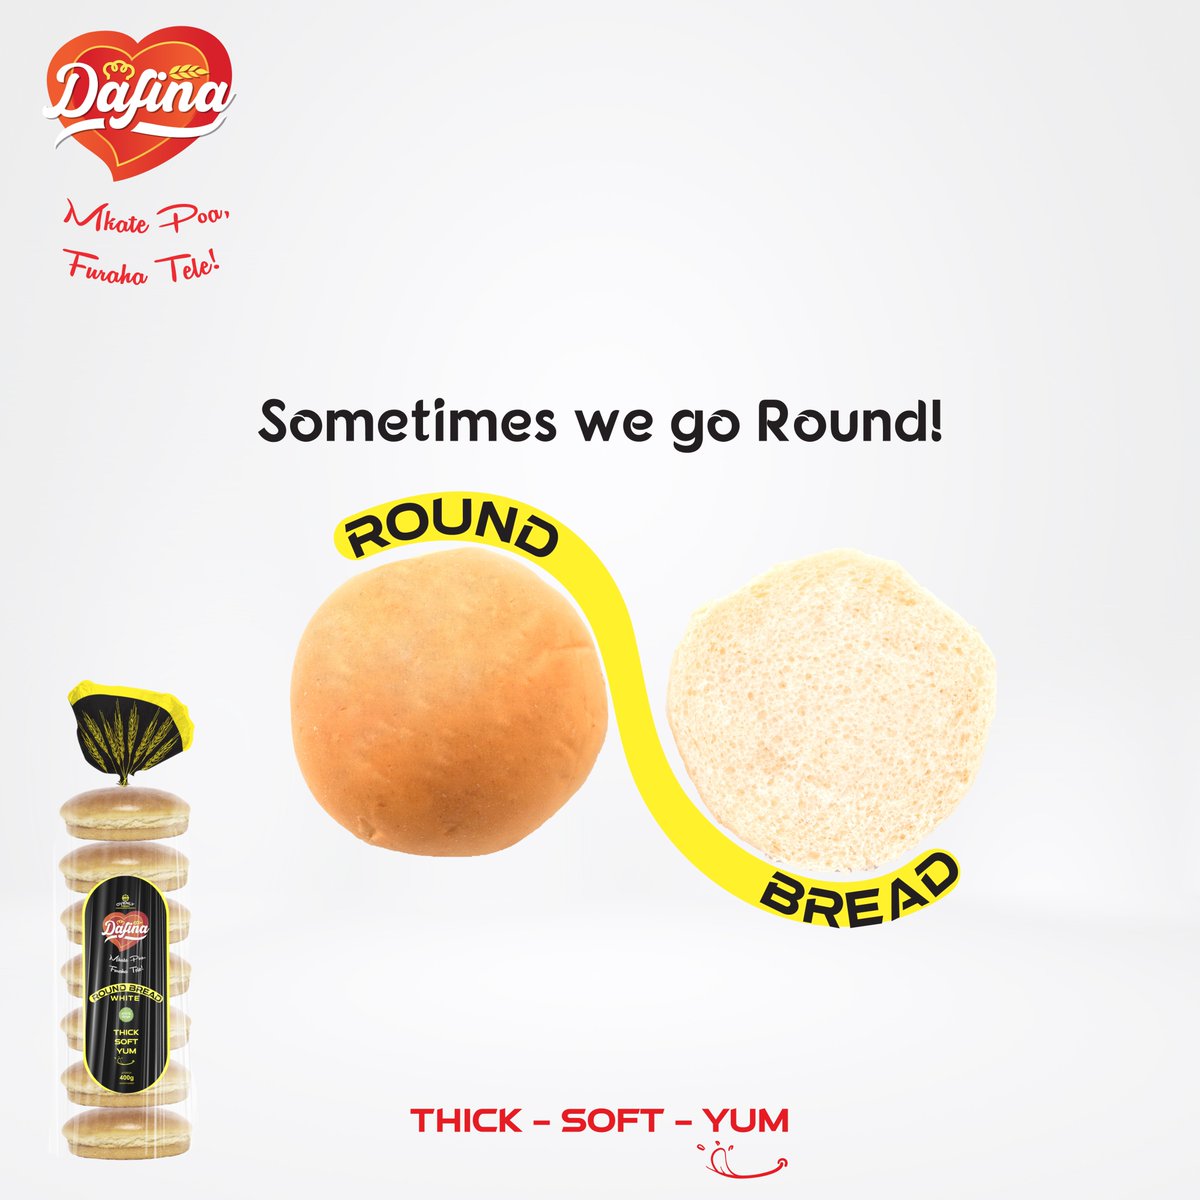 Have you tried going round?

There is bread, and then there is Dafina.

Just a call 0718111333, and that's all.

#TeamDafina #dafinabread  #healthy #premium #vegan100 #proudlykenyan #lowcalories #crustybread #keepyourcityclean #protectenvironment♻️🌎  #saturday #nairobikenya